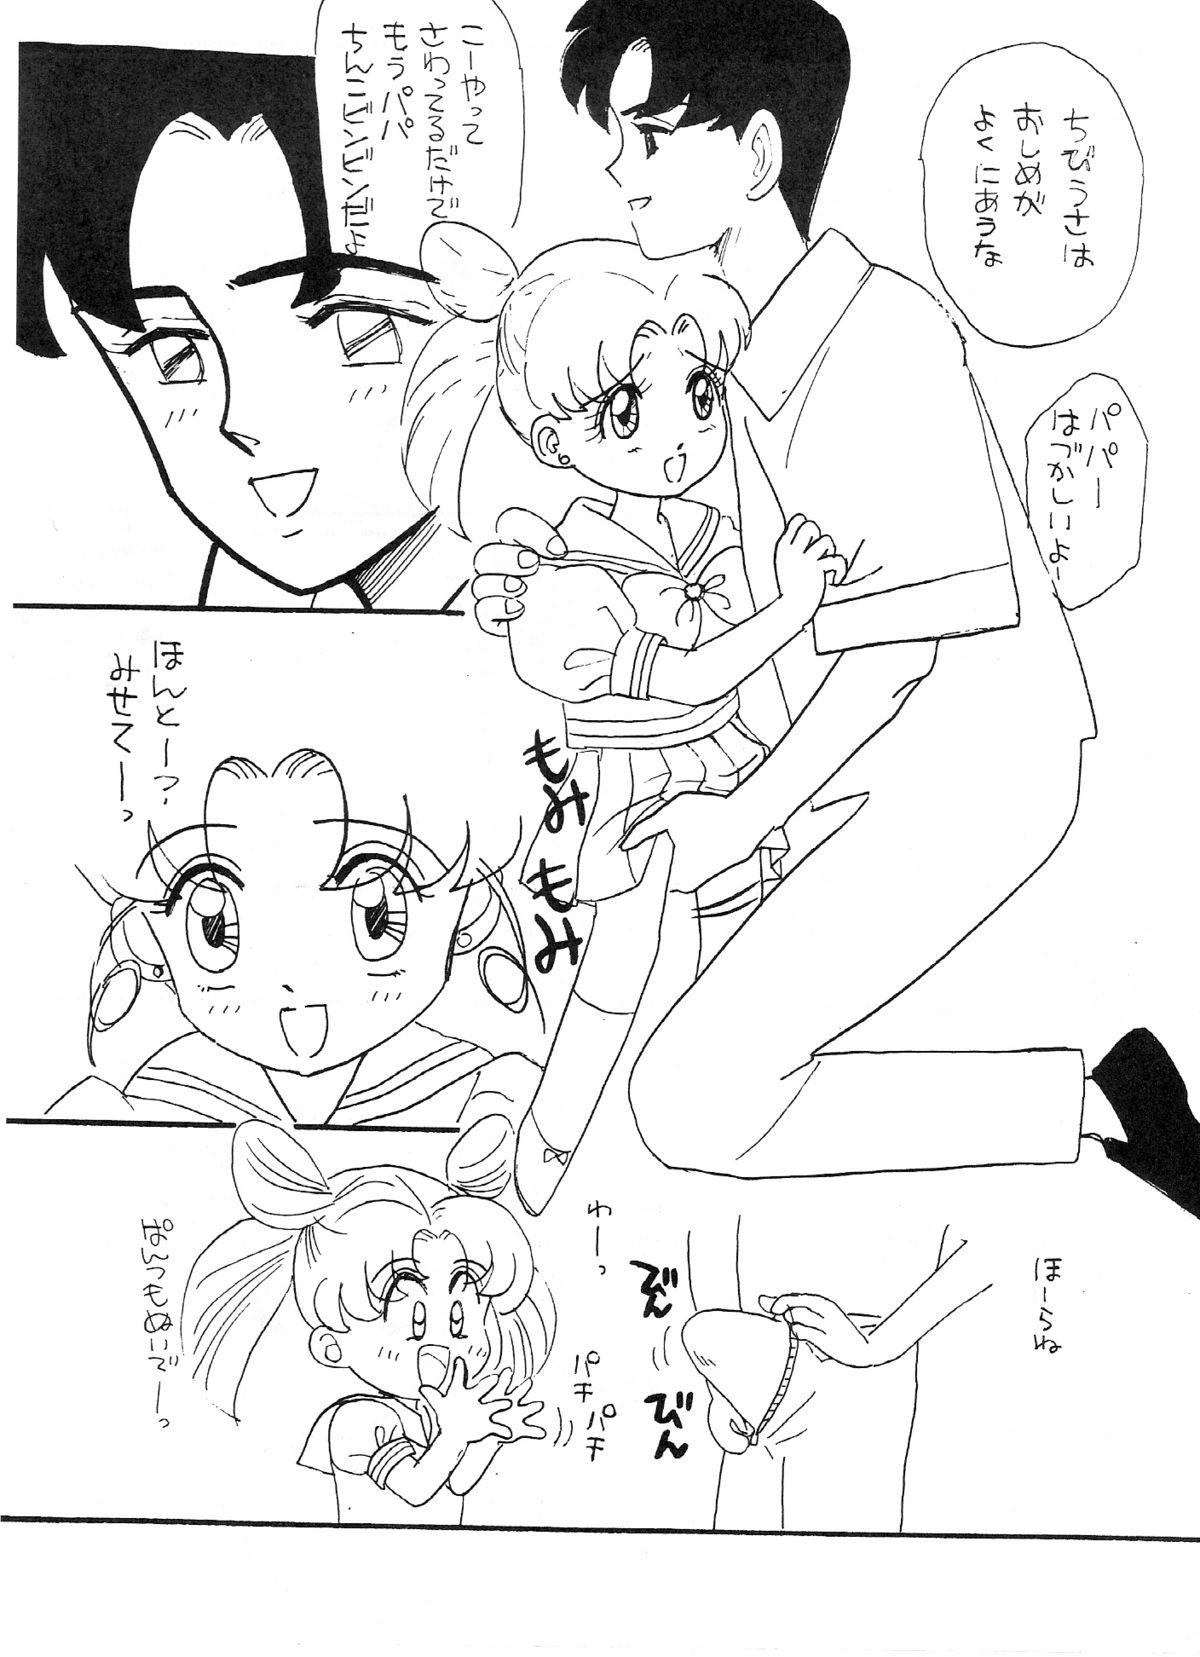 Whore SW-α - Sailor moon Hot Girl Fuck - Page 8